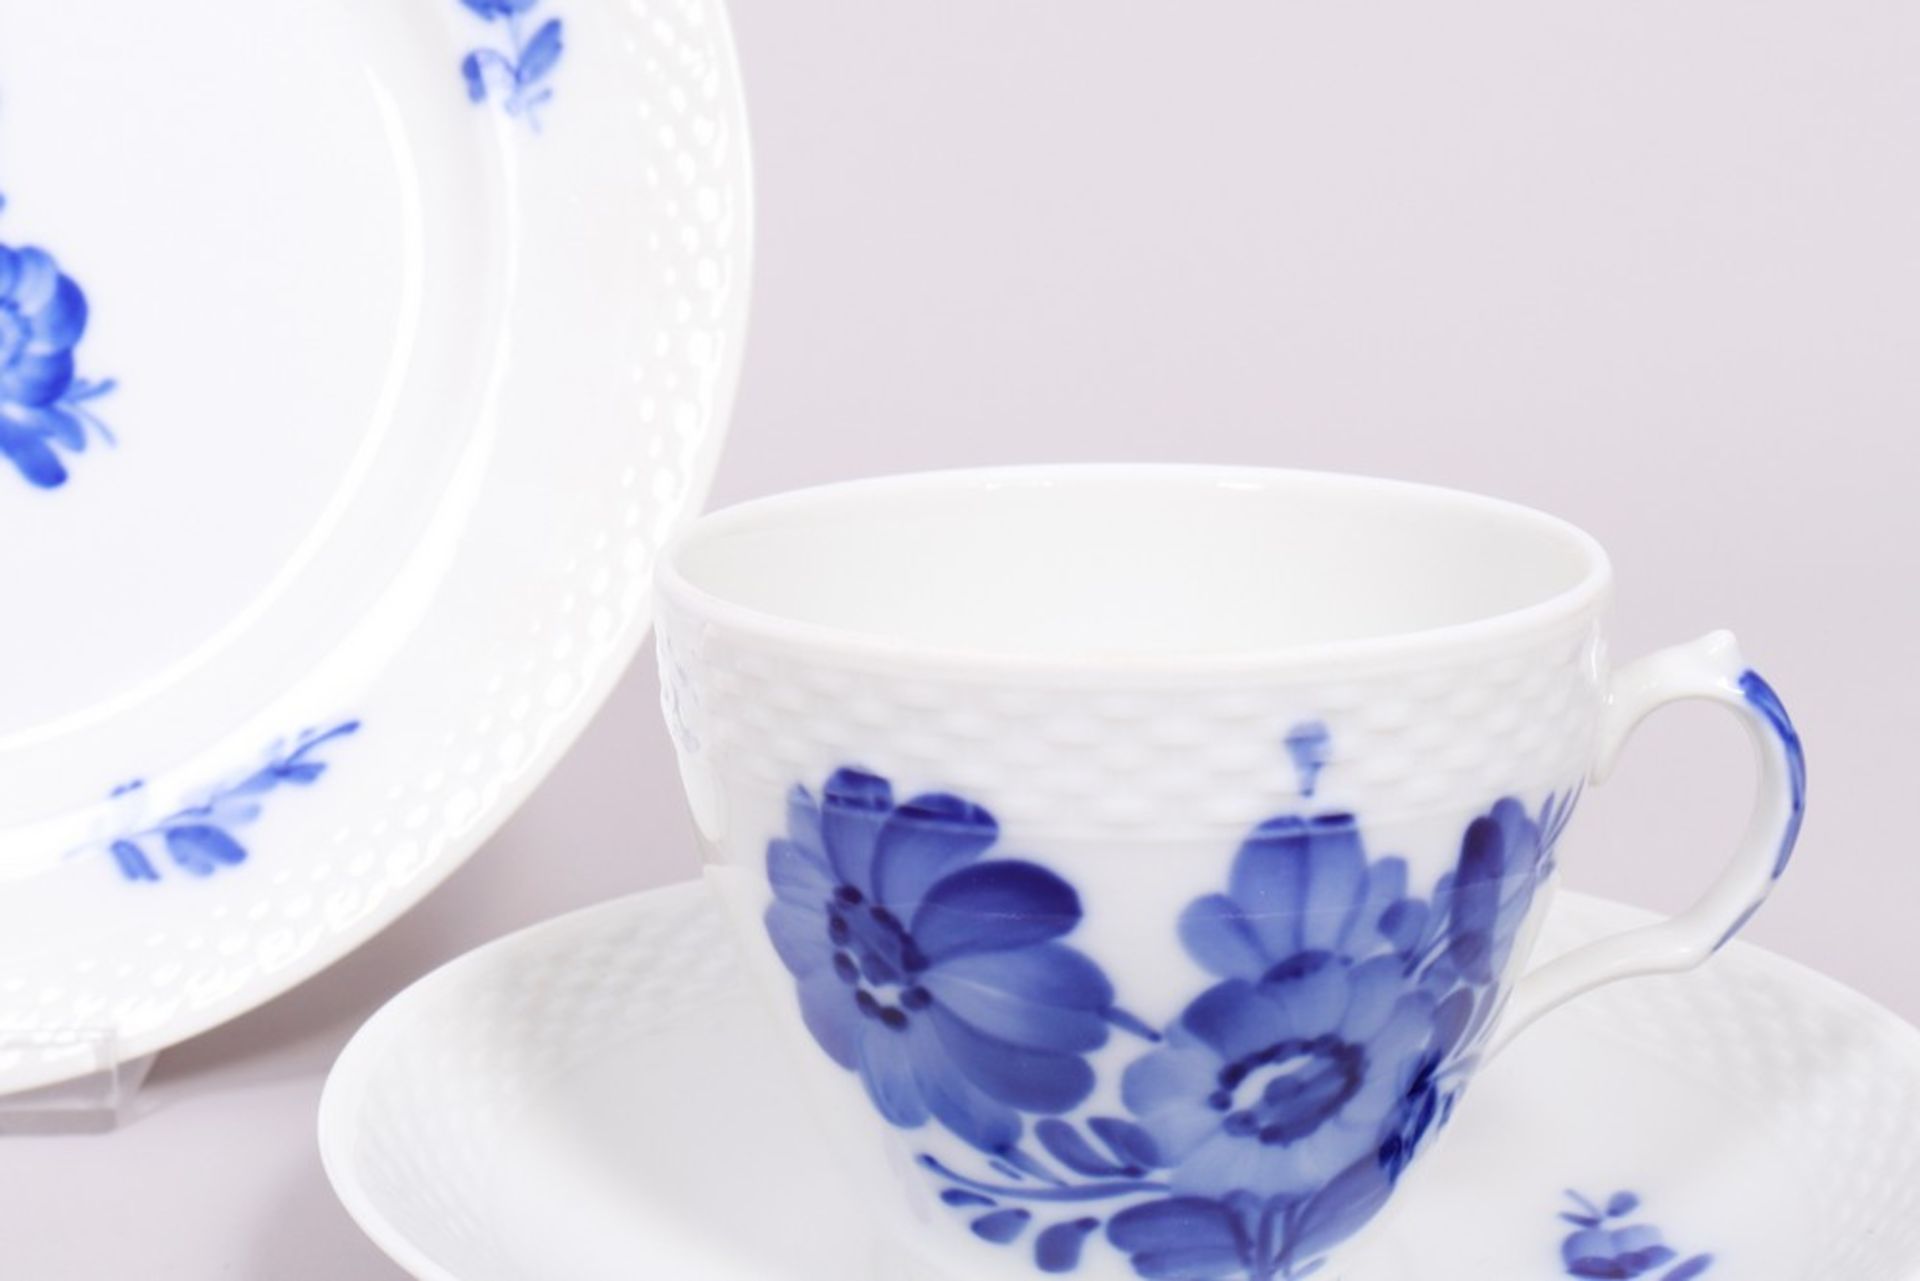 Coffee service for 8 persons, Royal Copenhagen, Denmark, “Blue Flower” decor with relief decoration - Image 6 of 8